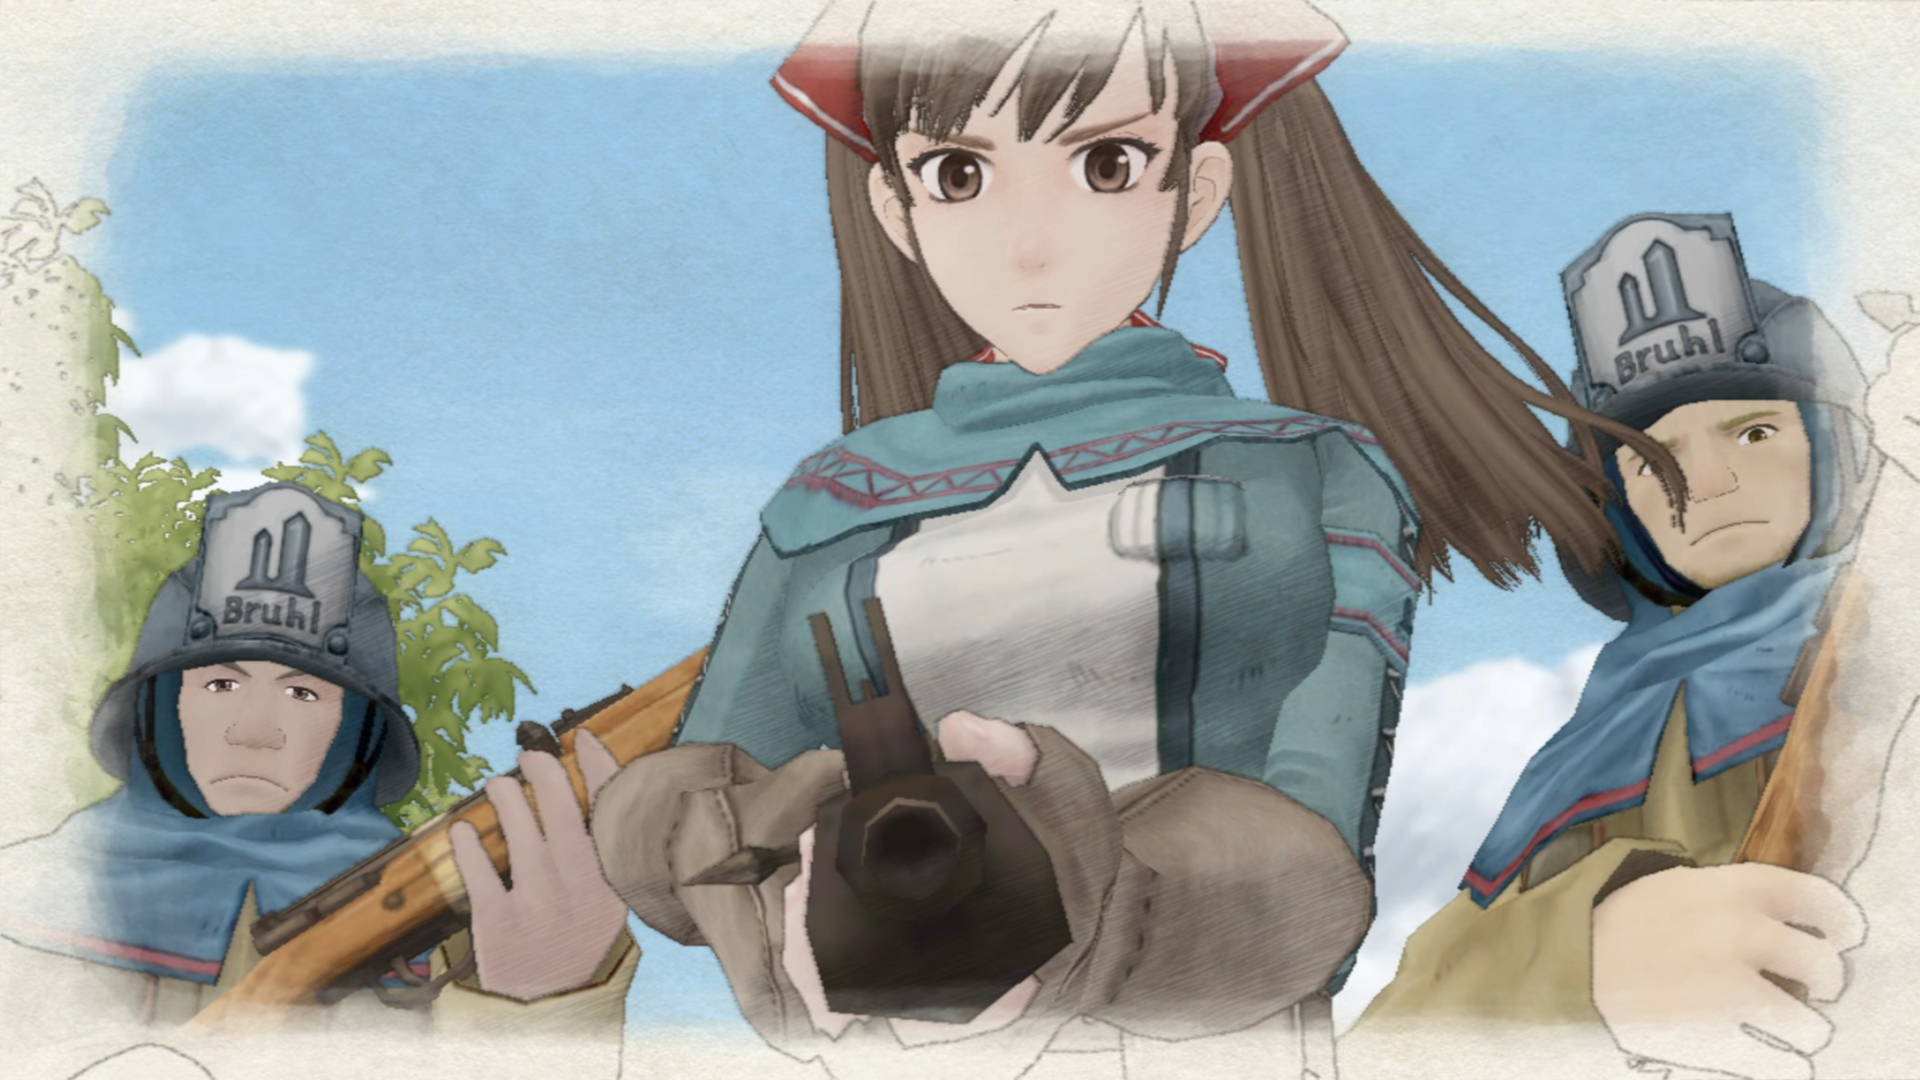 Valkyria Chronicles Backgrounds, Compatible - PC, Mobile, Gadgets| 1920x1080 px